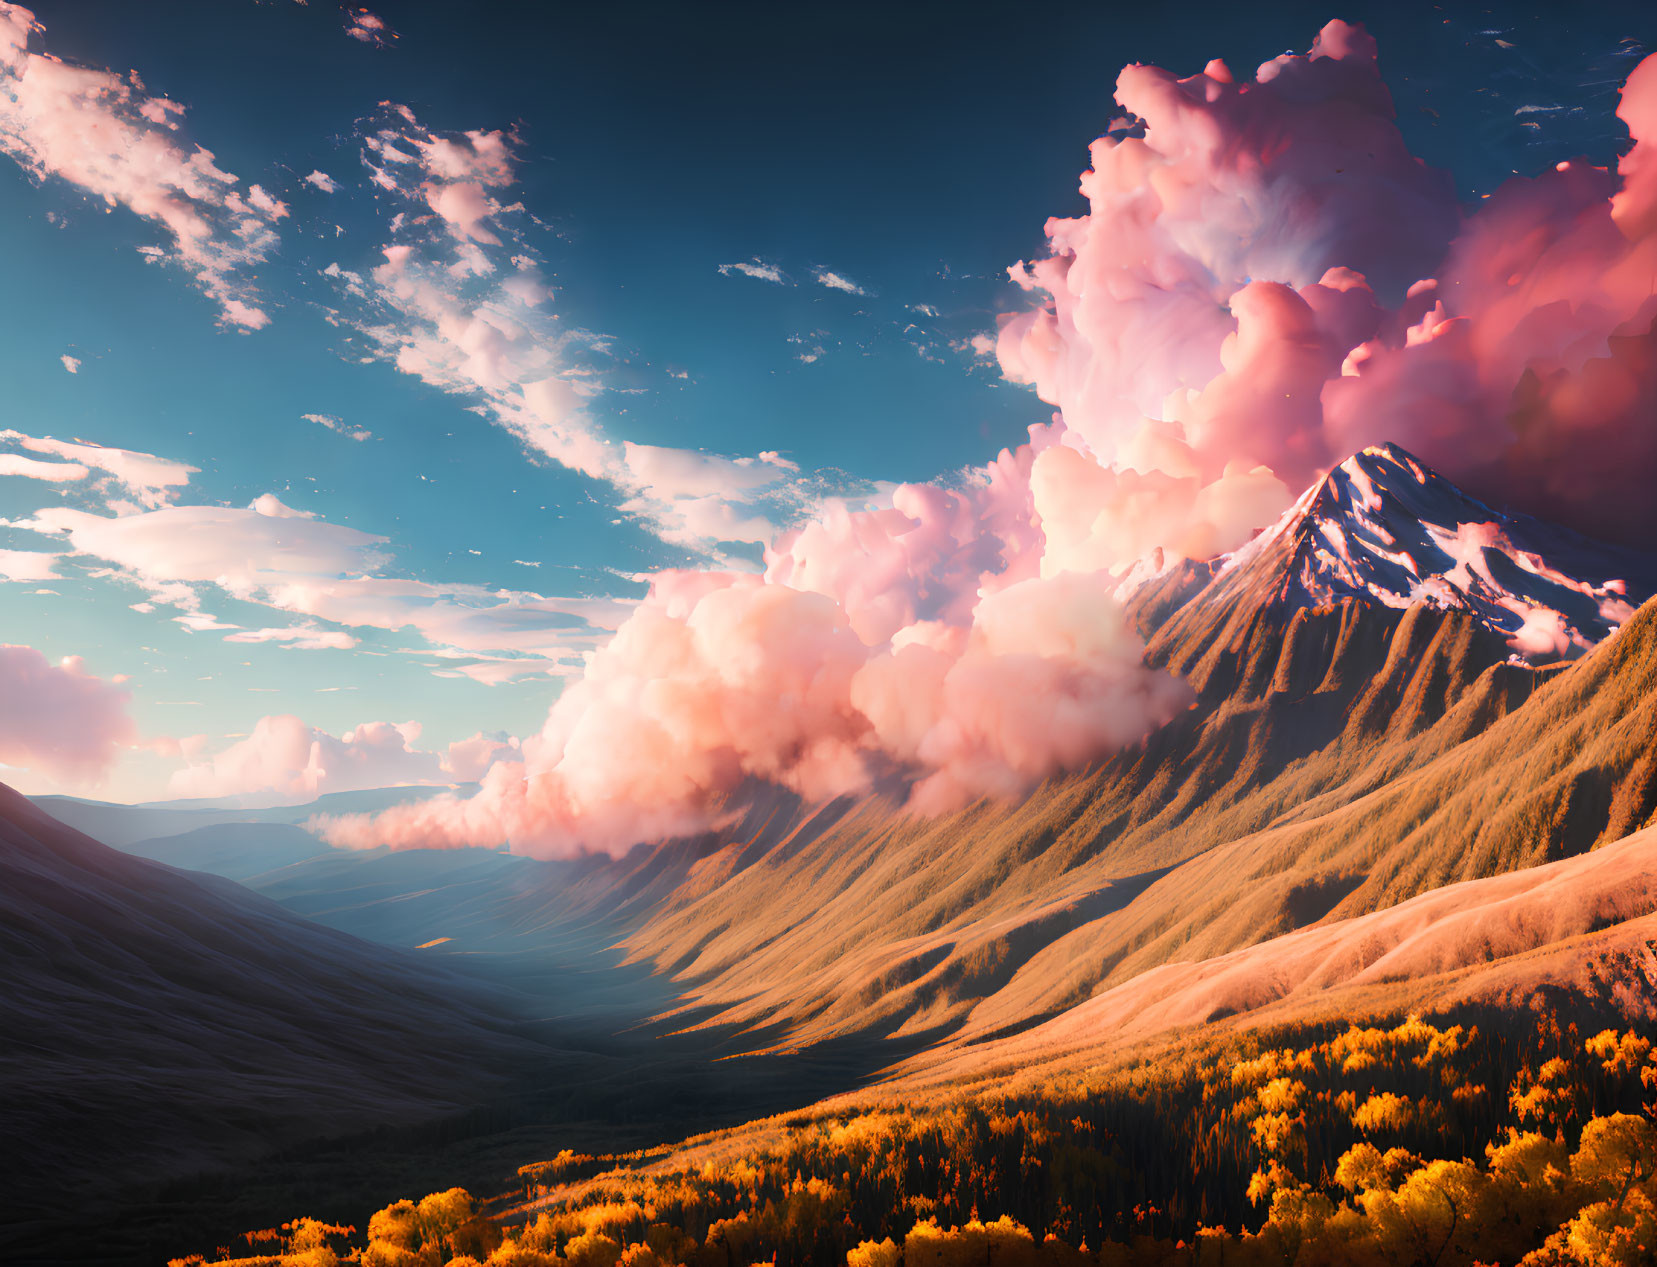 Snow-capped mountain, golden hills, pink clouds in blue sky